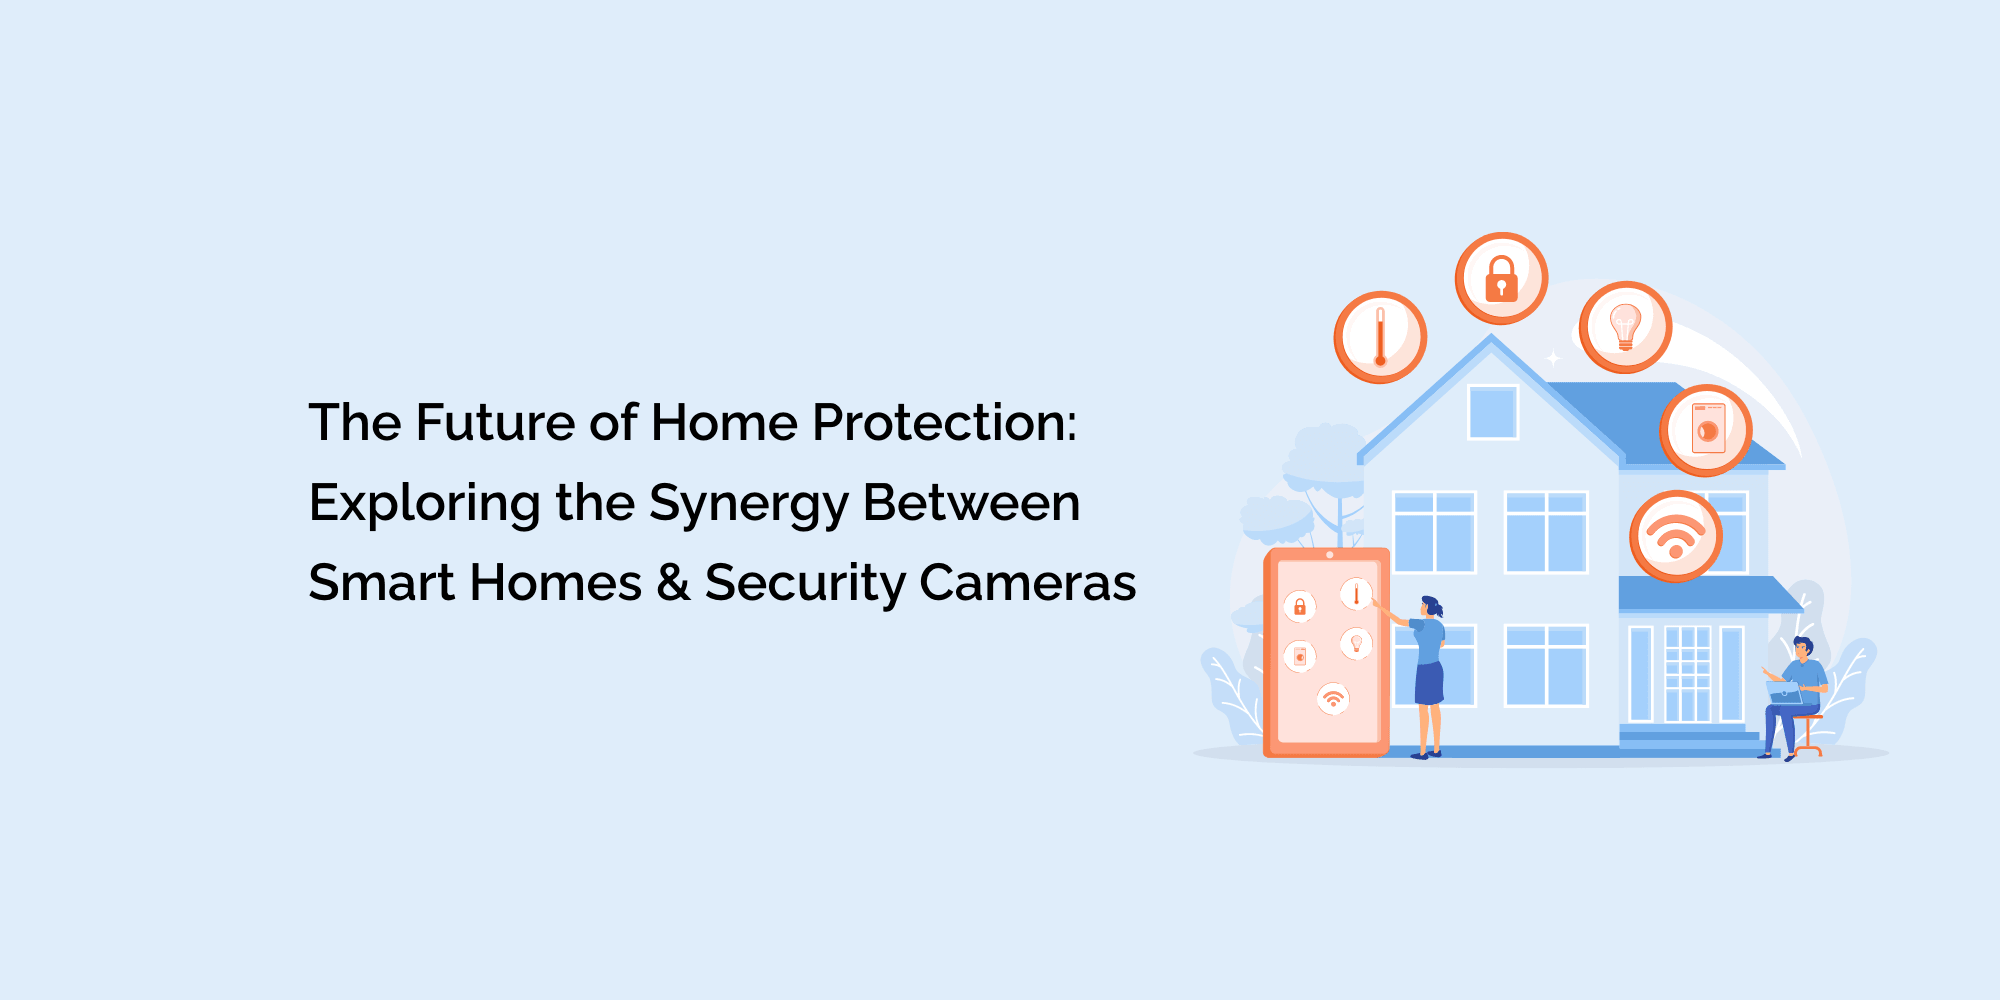 The Future of Home Protection: Exploring the Synergy Between Smart Homes and Security Cameras